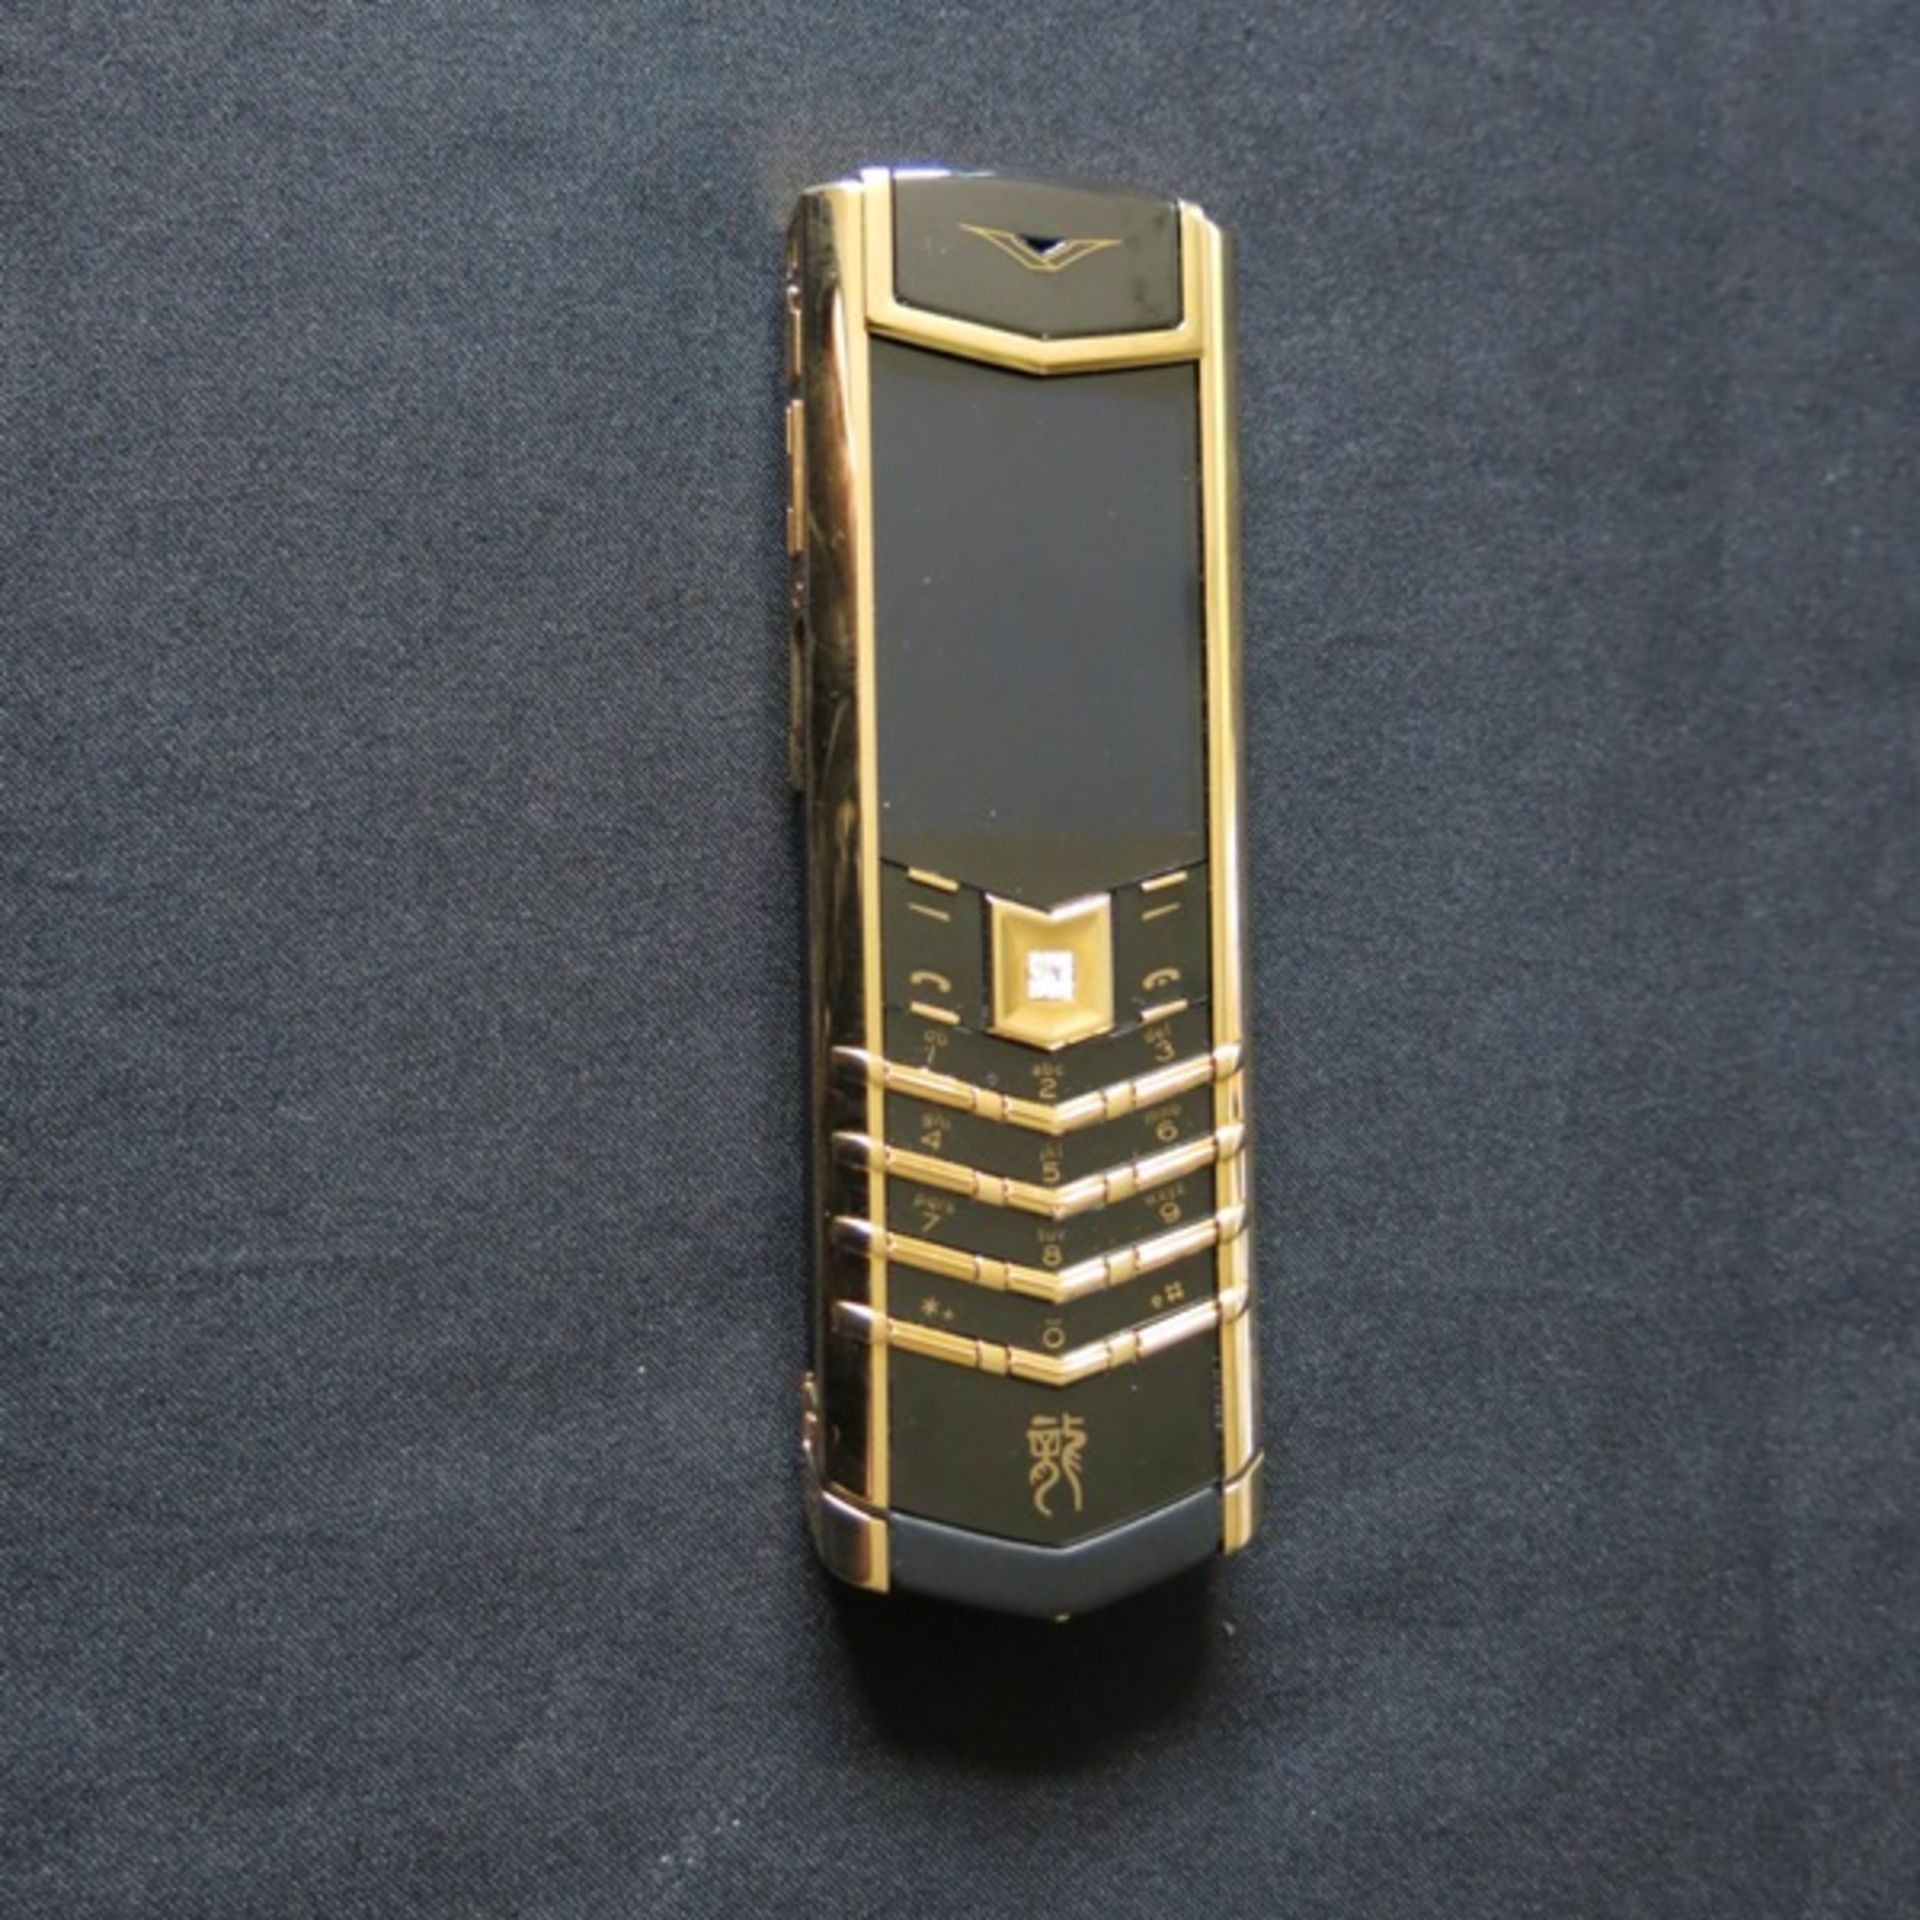 Vertu 18kt Yellow Gold Signature S Phone. Special Edition Dragon with Small Diamond Eyes &